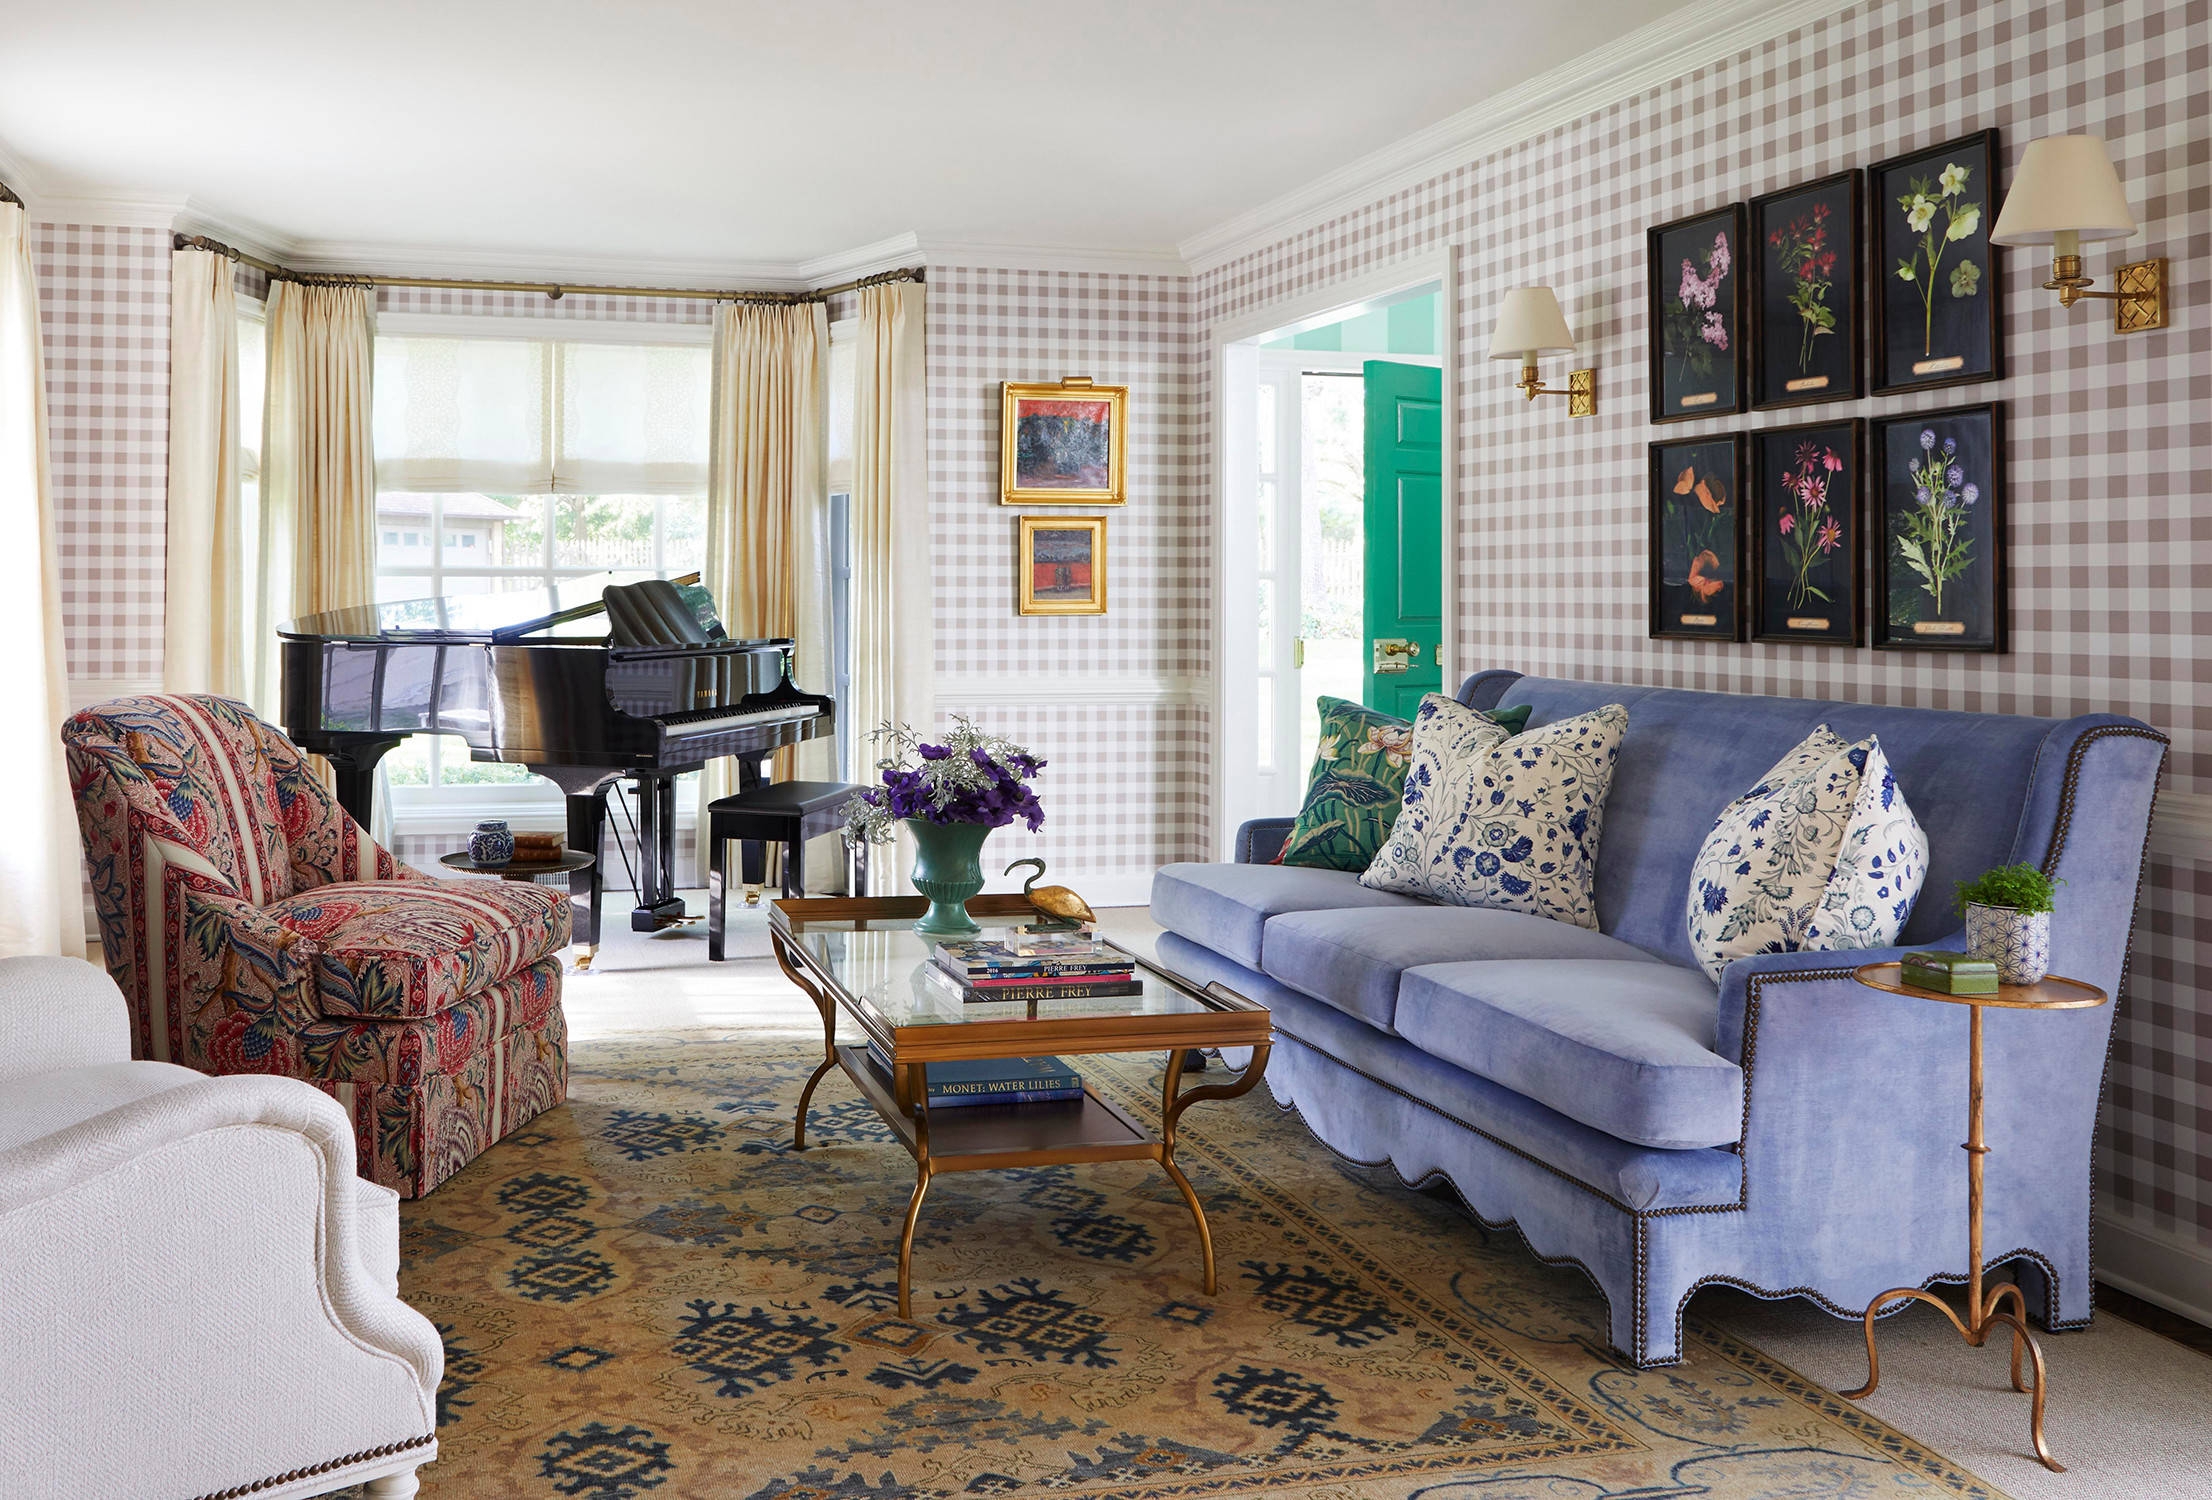 Room with gingham walls and very peri sofa